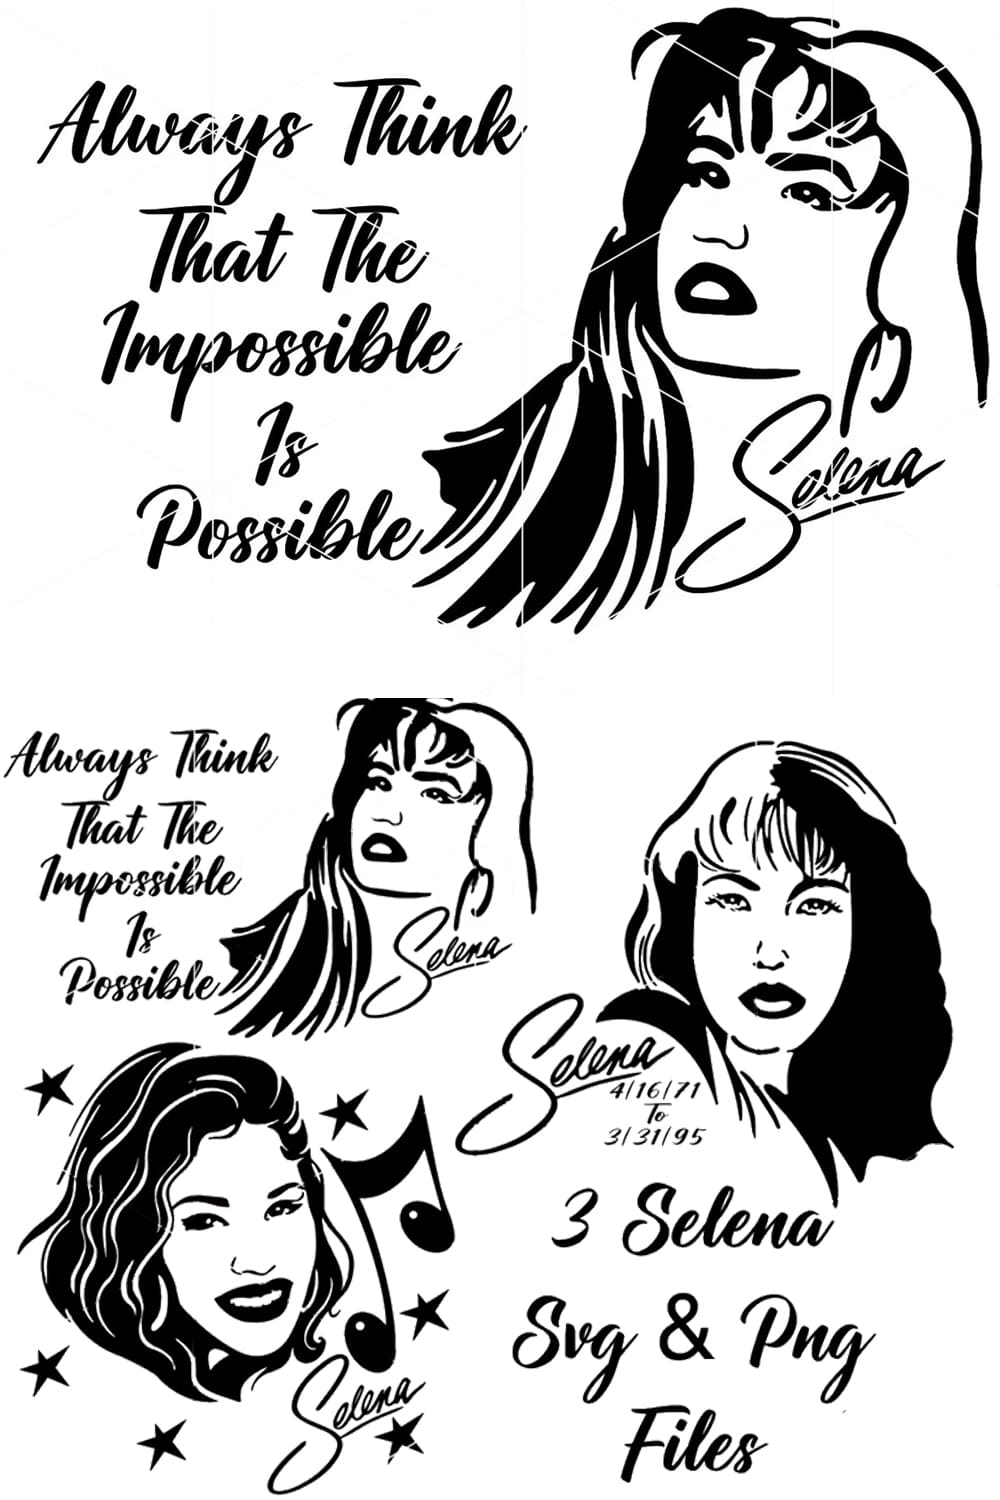 3 selena svg pngs for design ideas.